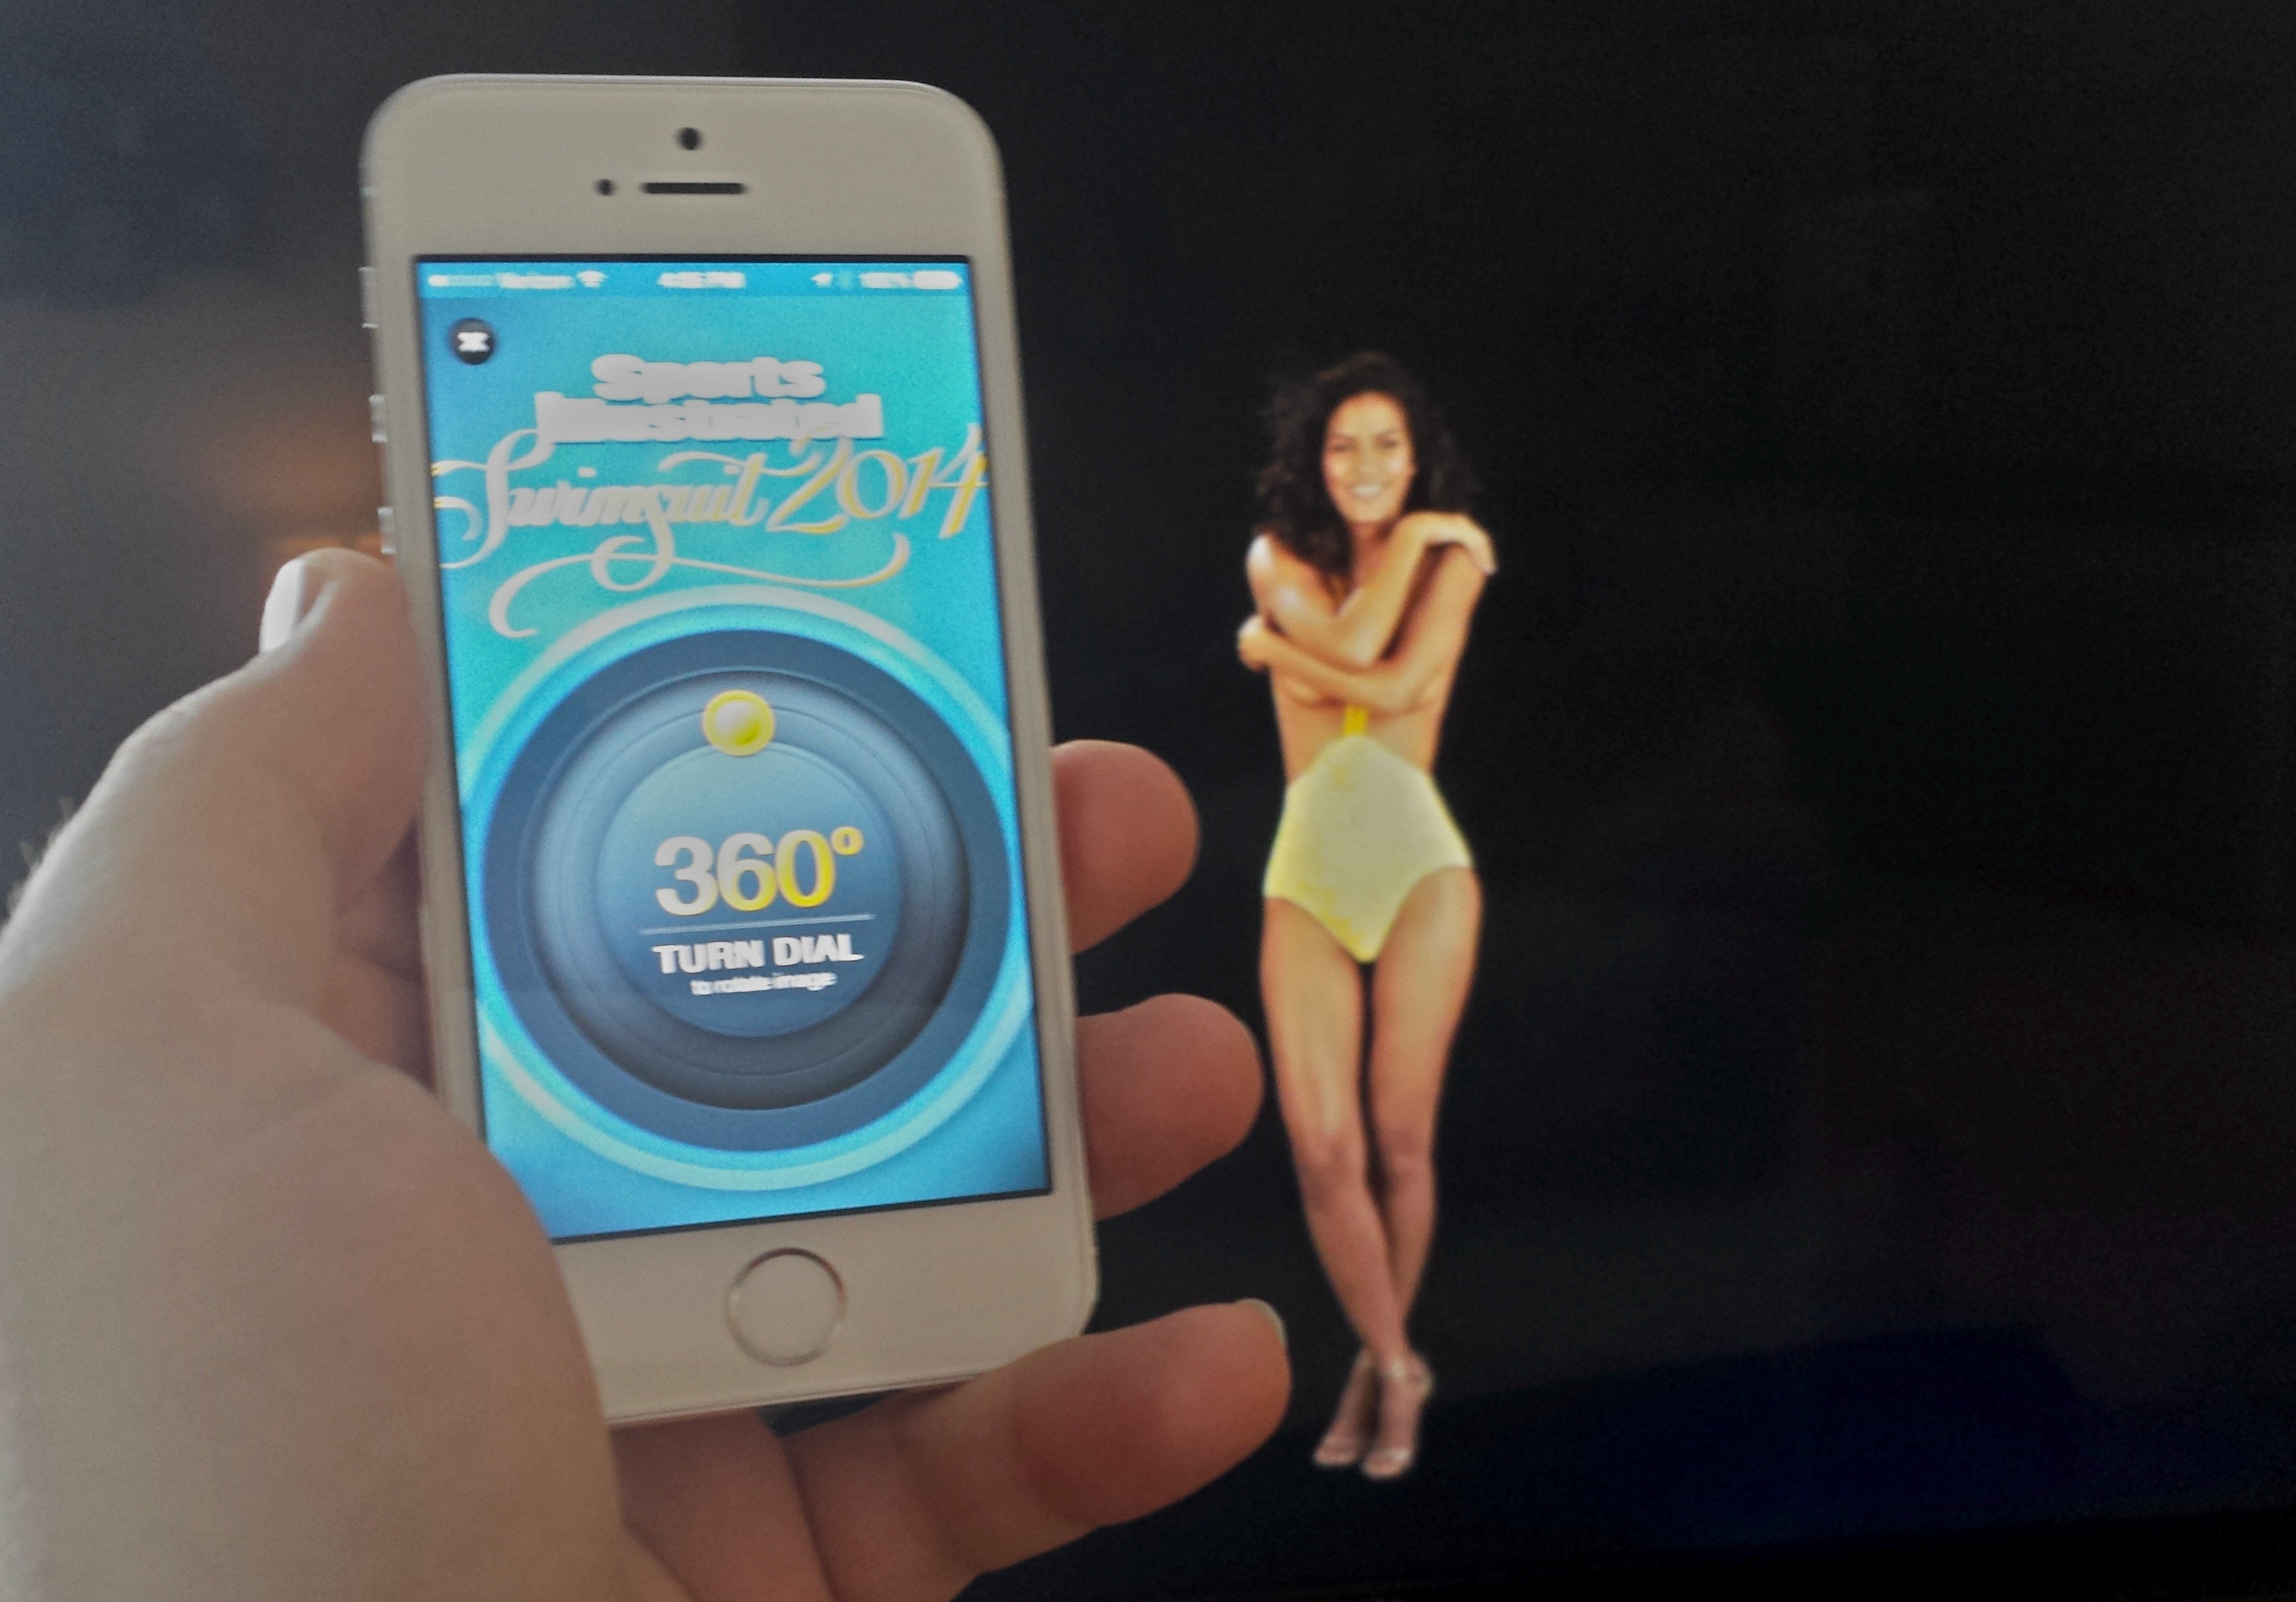 The Sports Illustrated Swimsuit 2014 app includes AirPlay options.